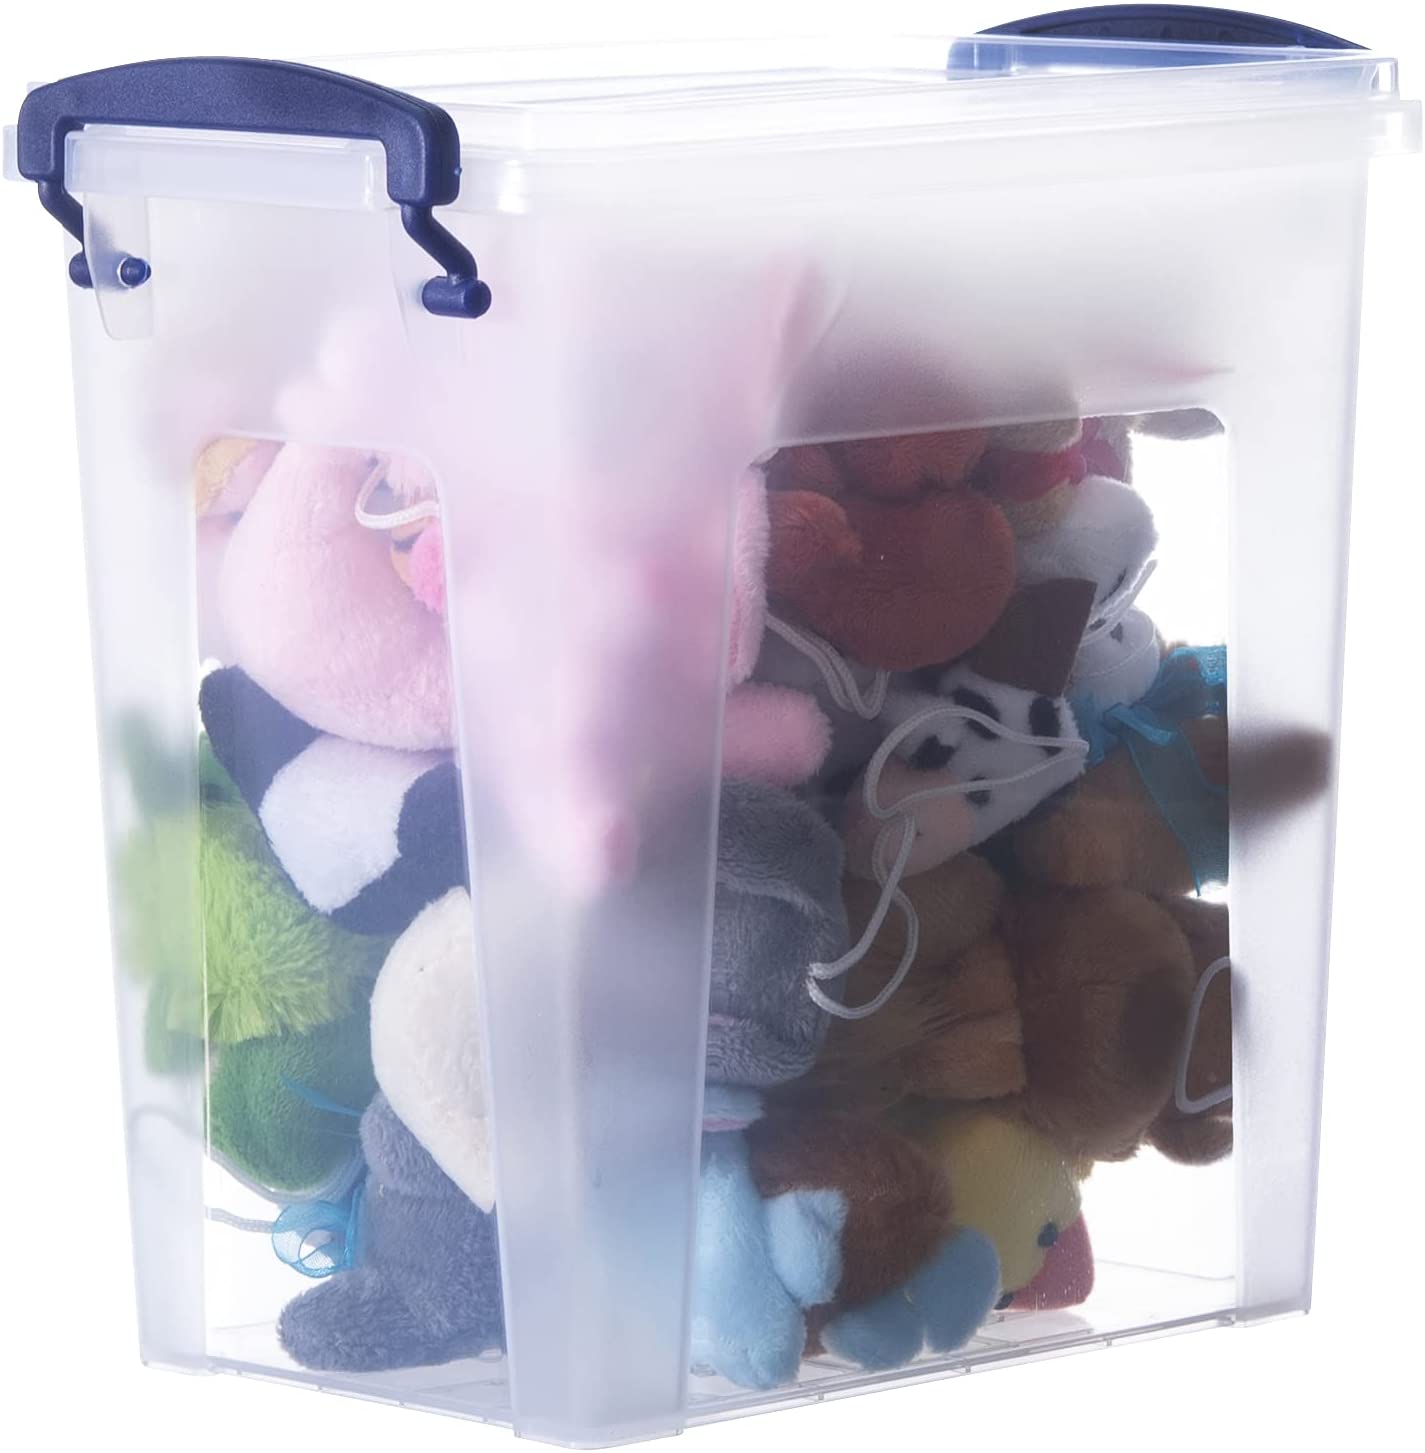 Superio Brand 0.93 Gallon Deep Plastic Storage Bins with Lid, Clear - image 1 of 6